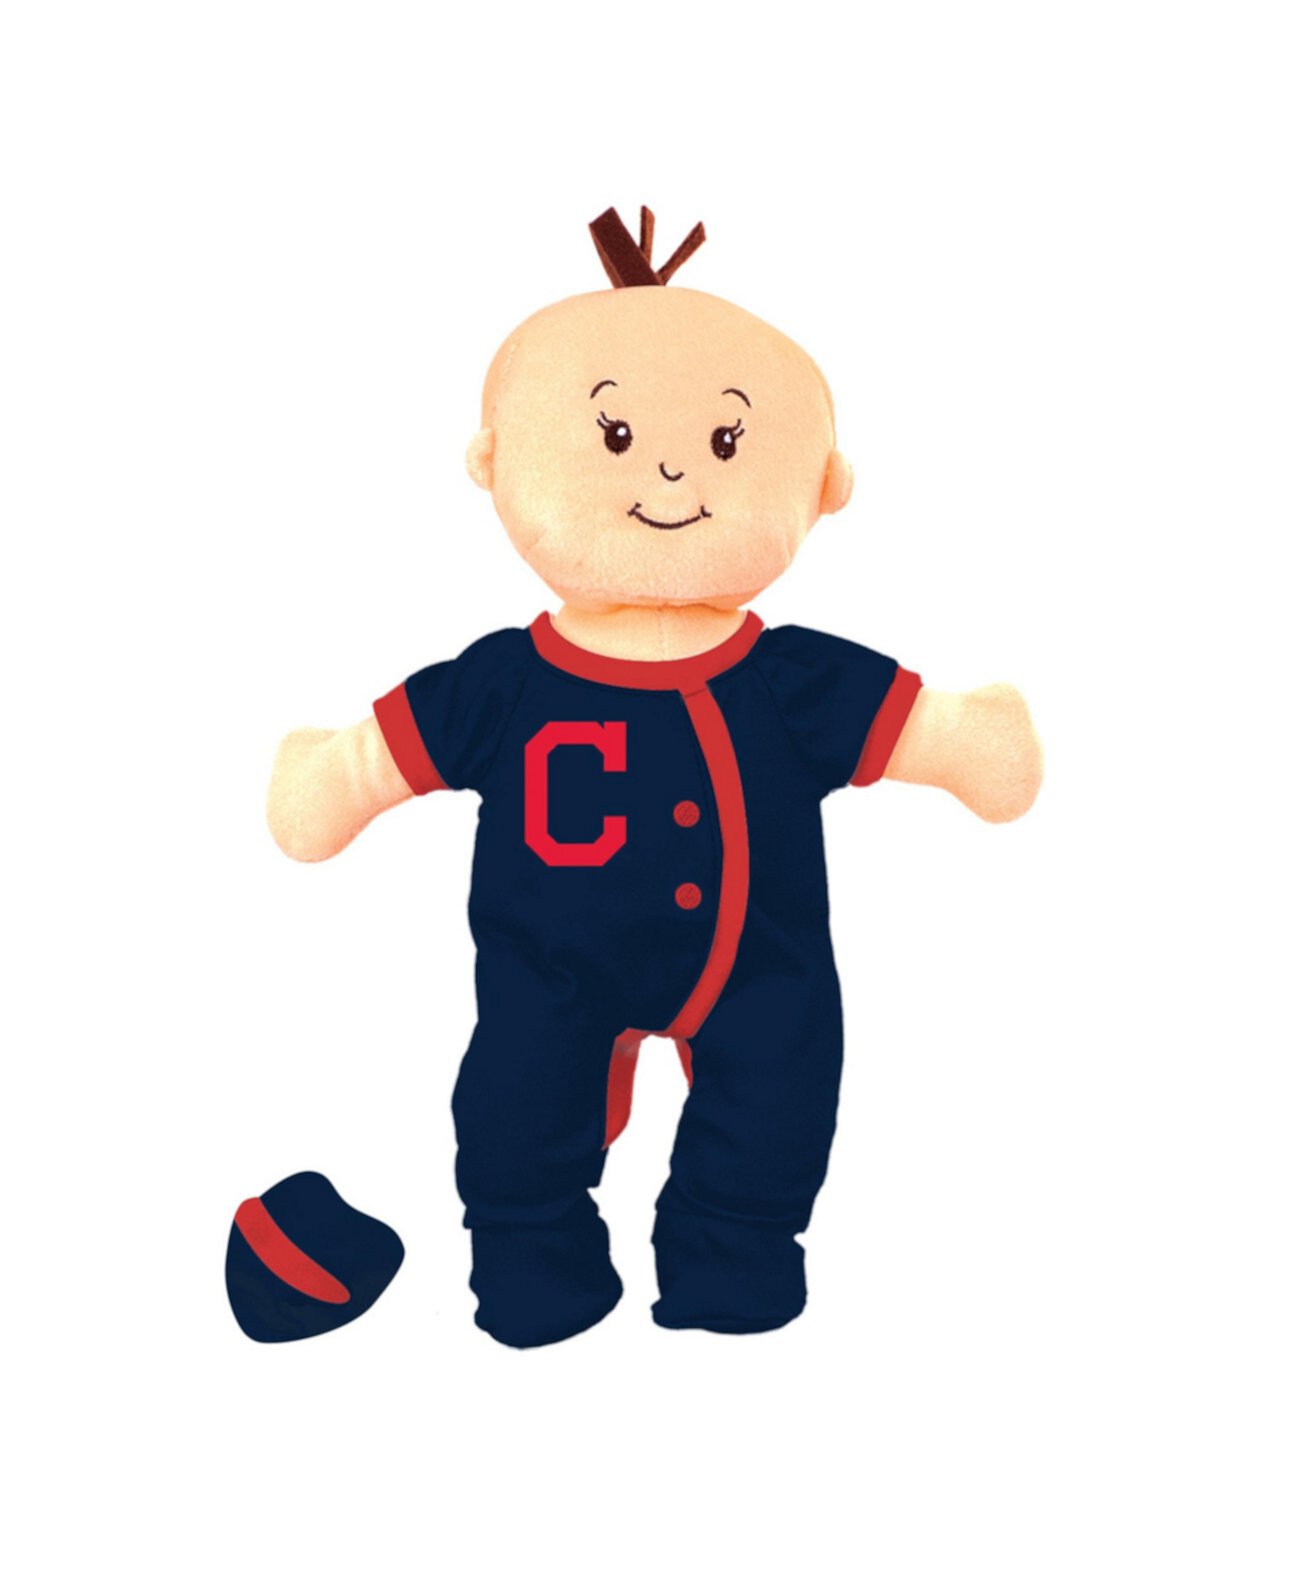 MLB Wee Baby Doll, Cleveland Indians Baby Fanatic